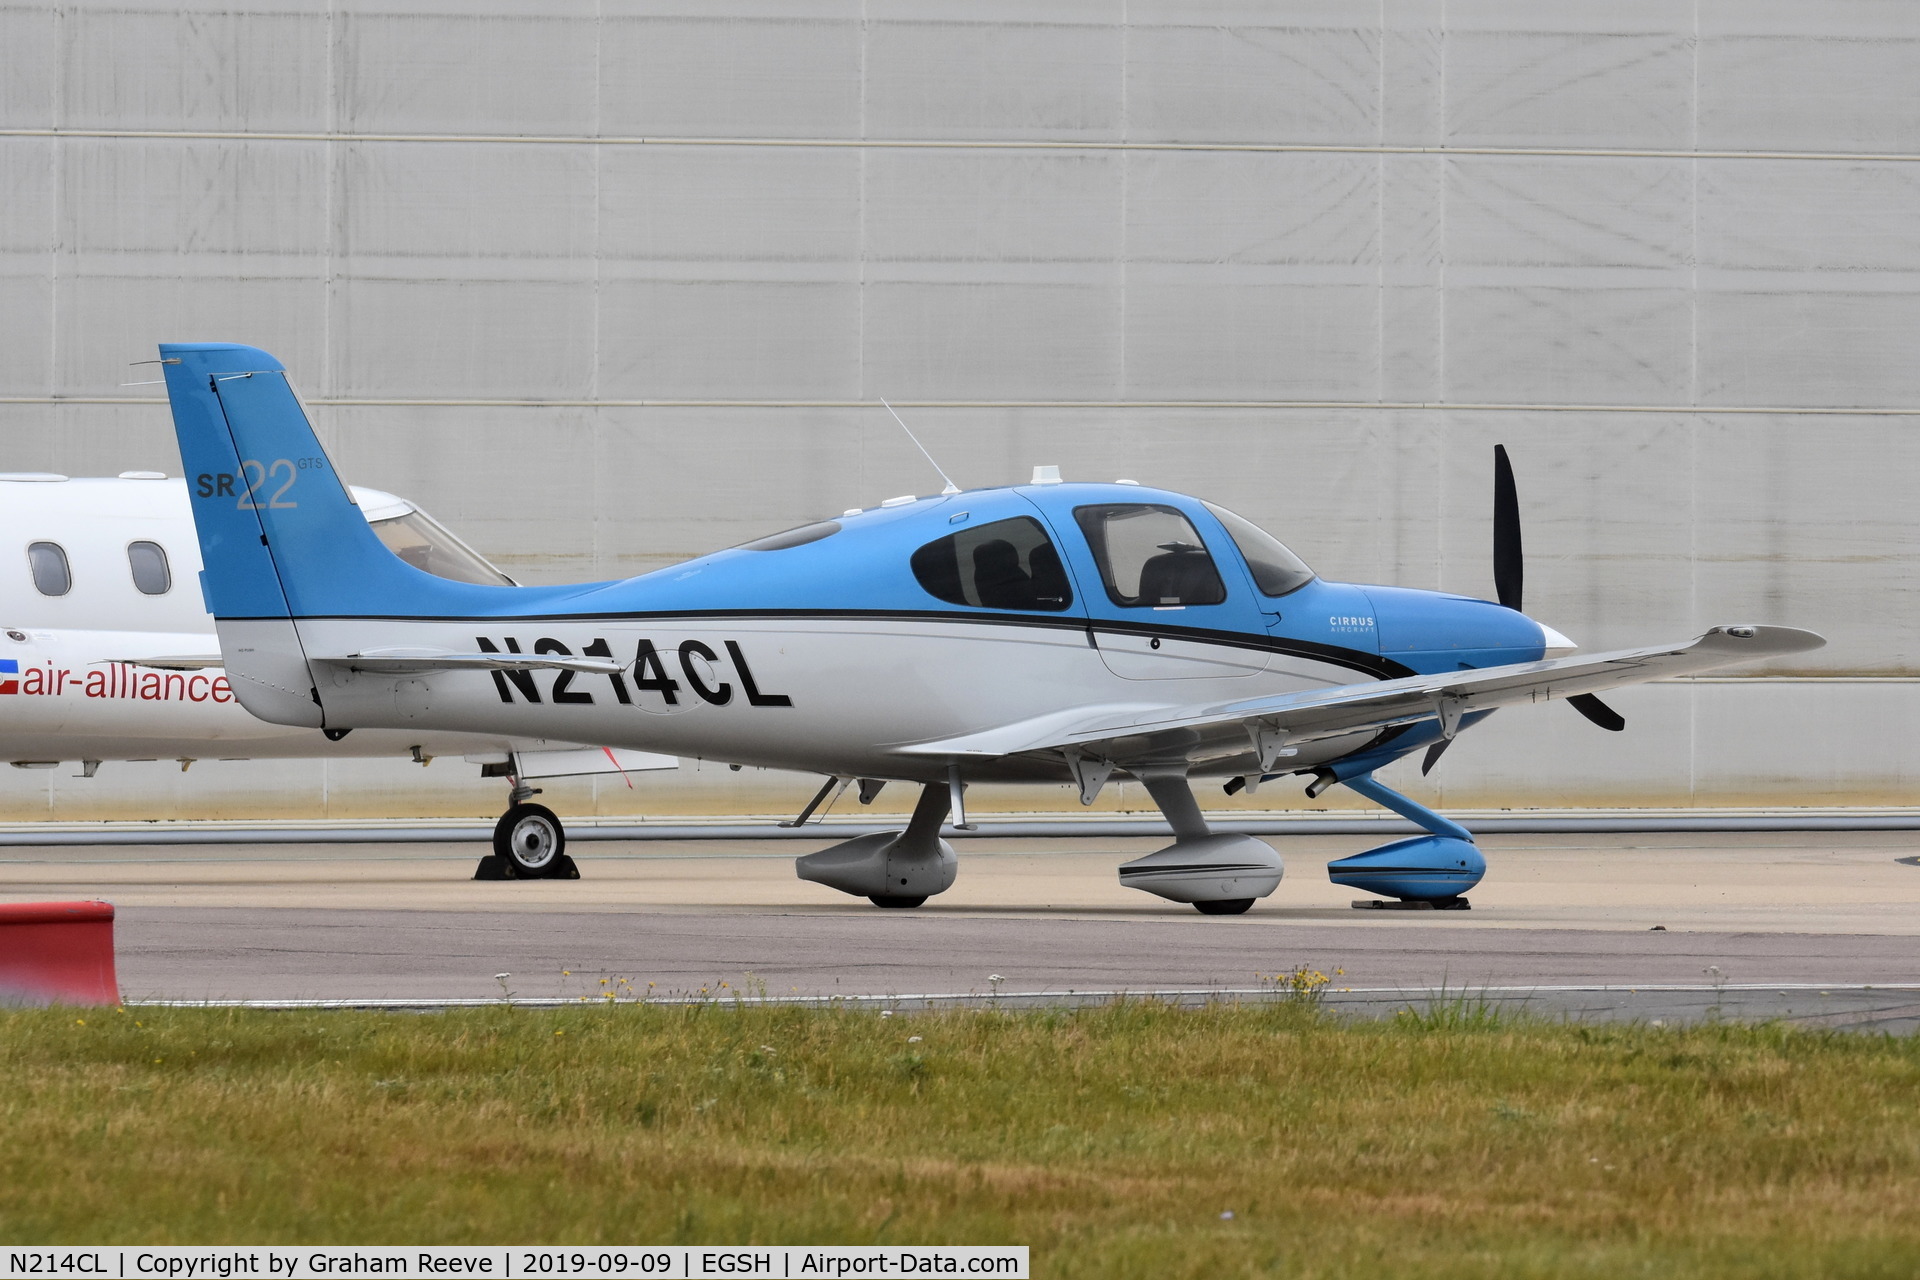 N214CL, 2012 Cirrus SR22 GTS C/N 3830, Parked at Norwich.